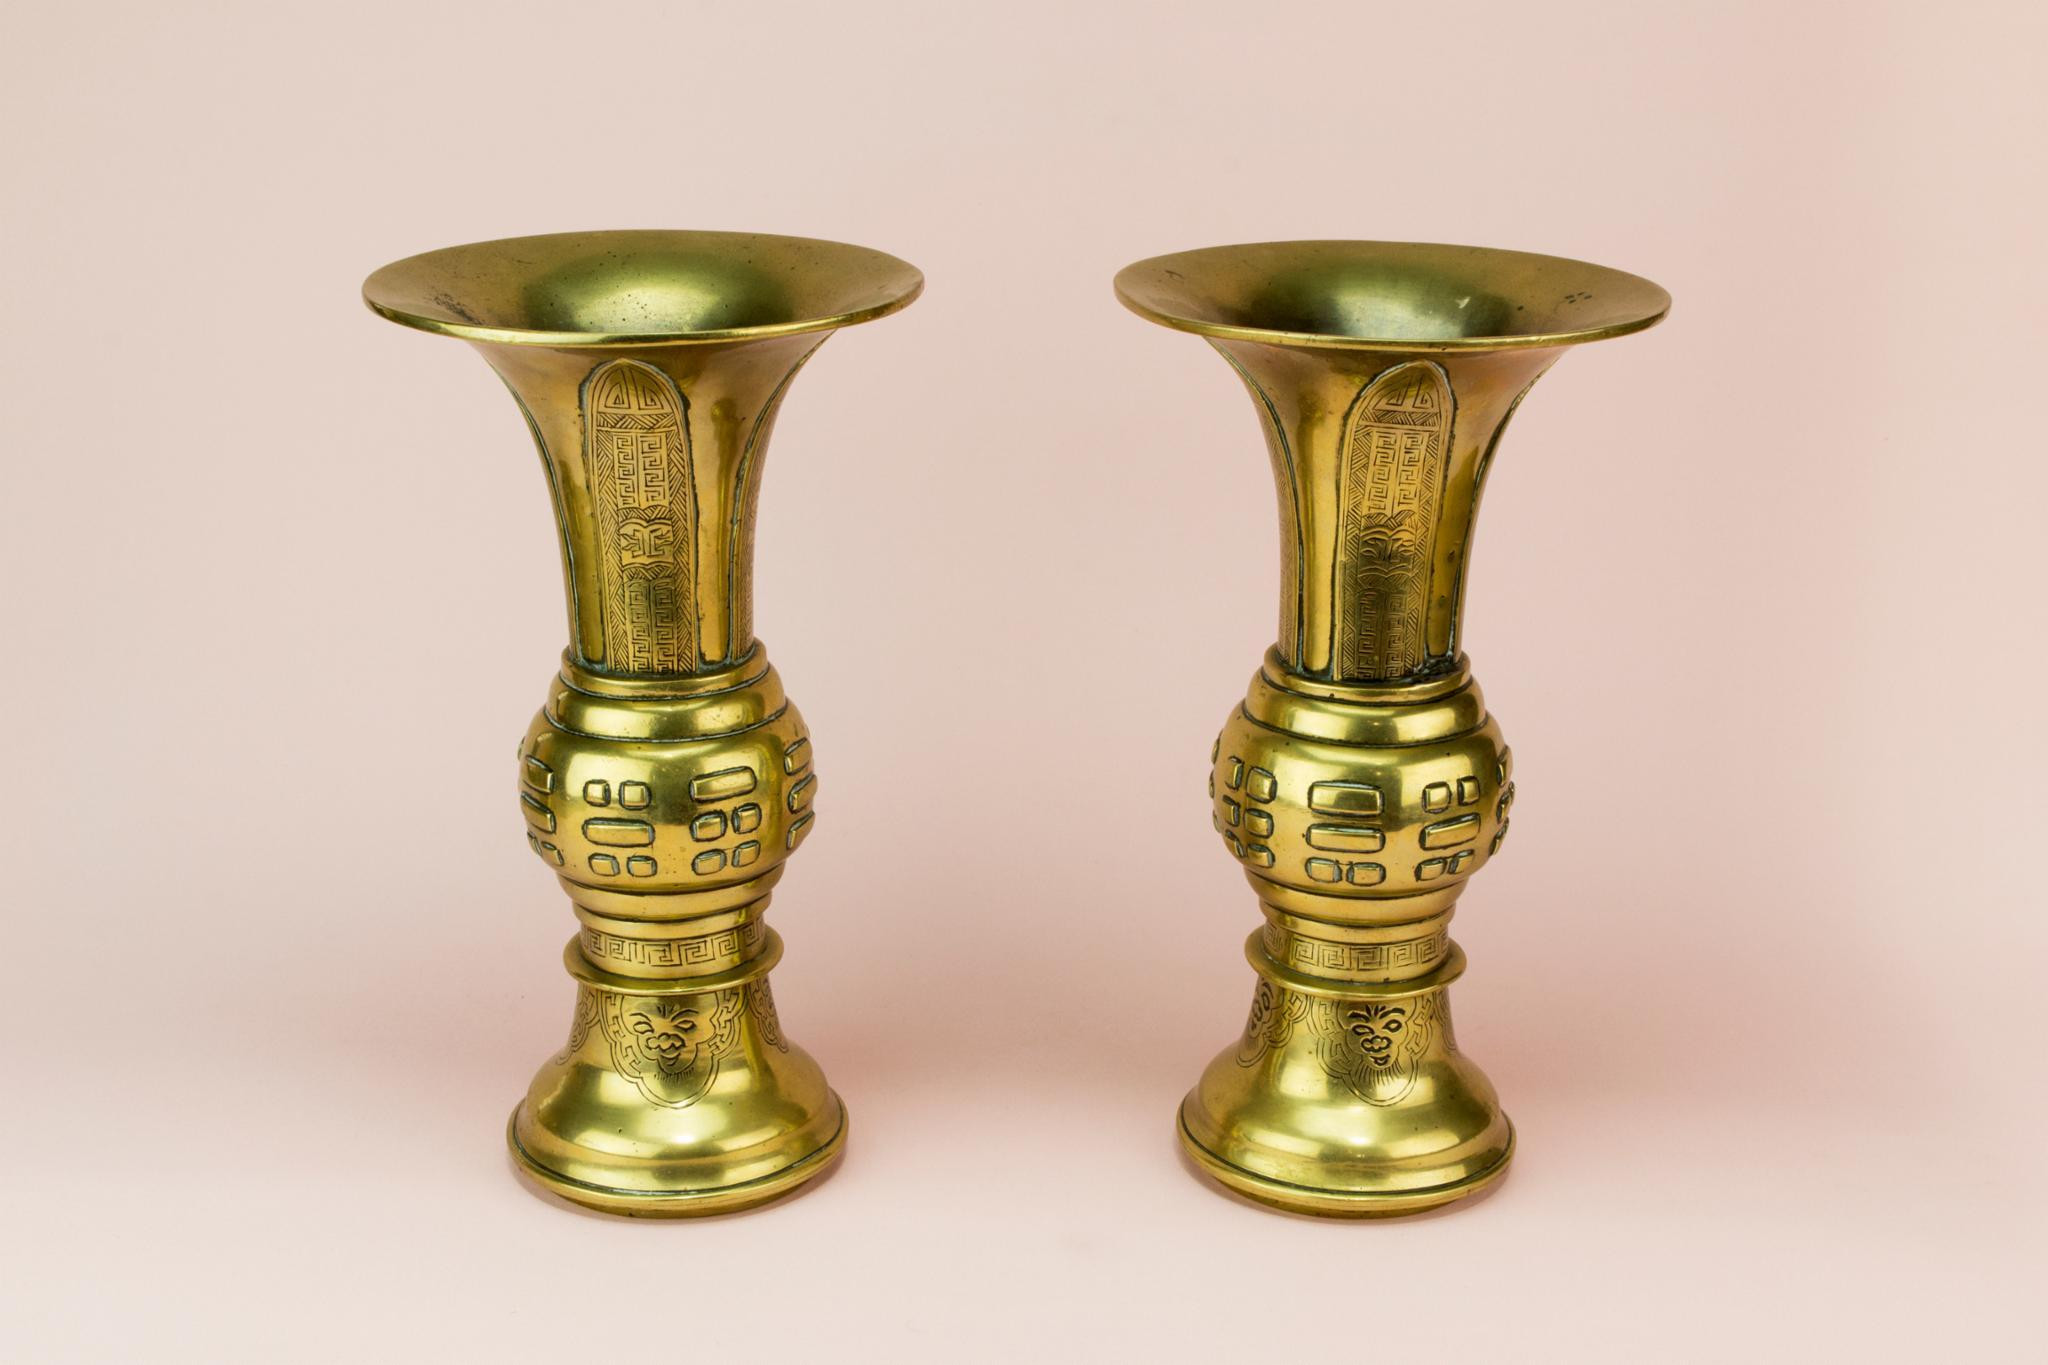 chinese porcelain vase shapes of 2 gu shaped brass vases chinese 19th century late 19th century for 2 gu shaped brass vases chinese 19th century